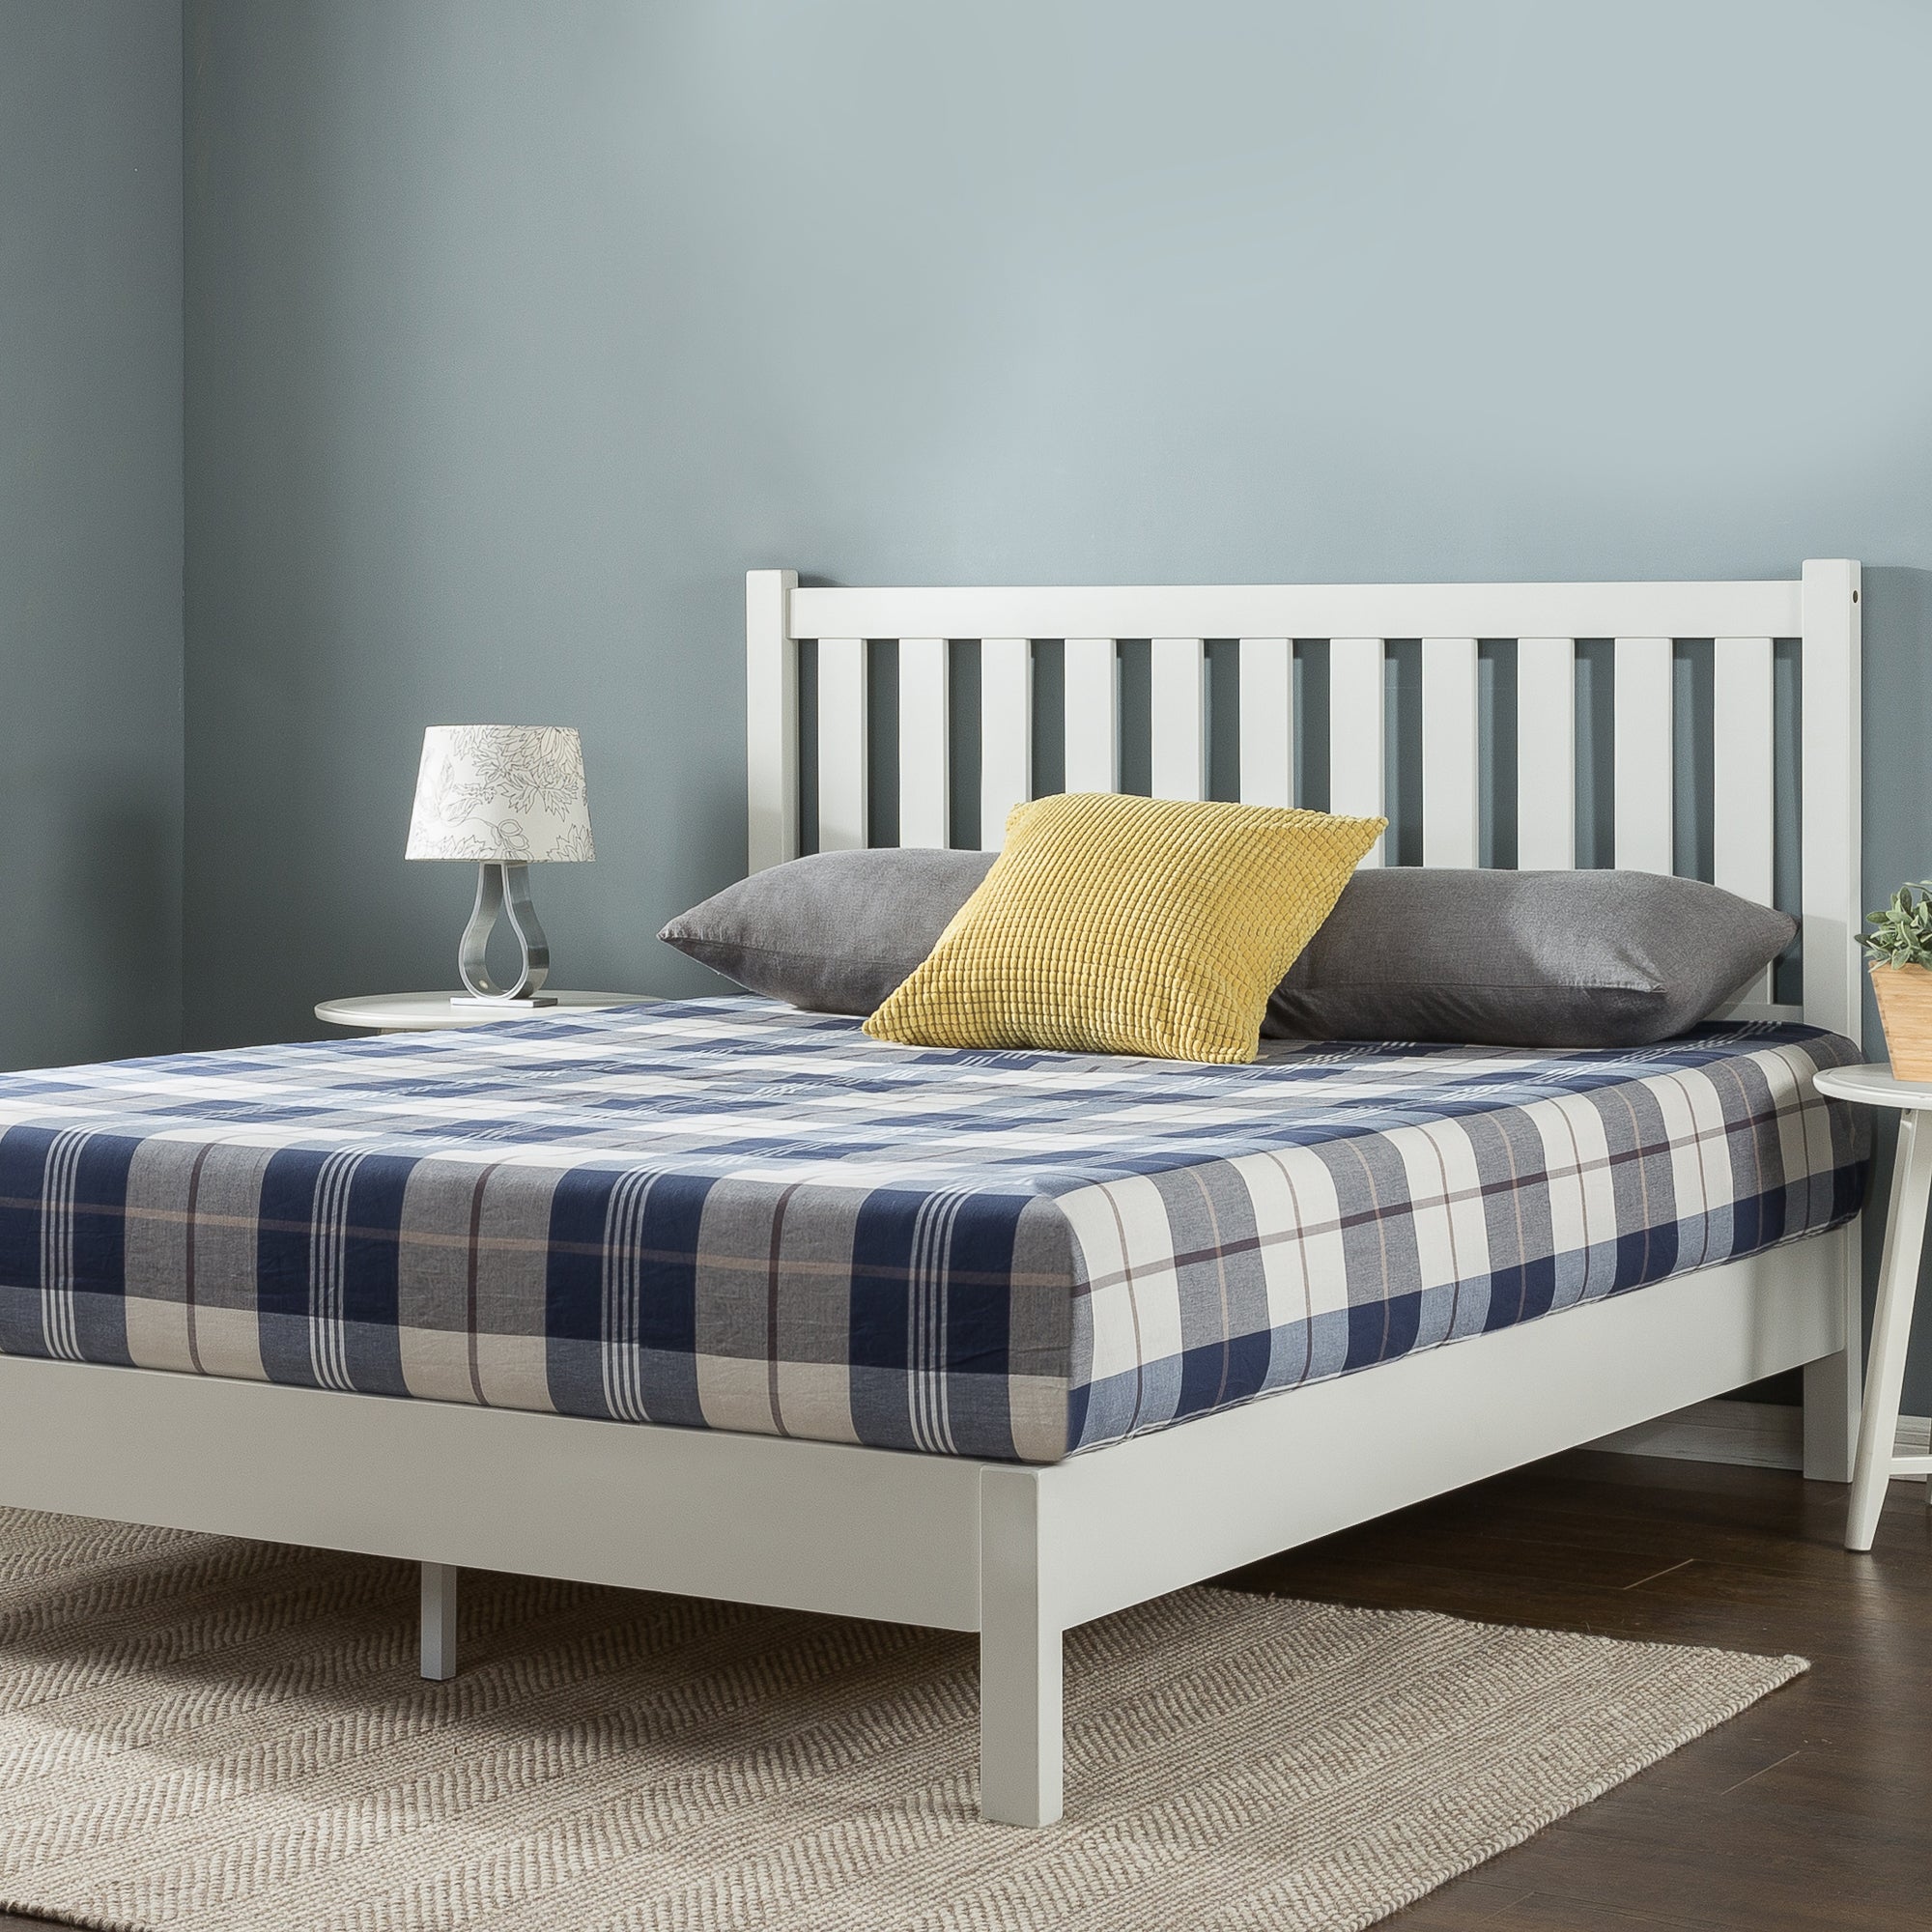 Zinus Clara Acacia White Wood Bed Frame With Slatted Headboard Mattress Foundation Double Queen Size 2204489 00 ?v=637284398682034849